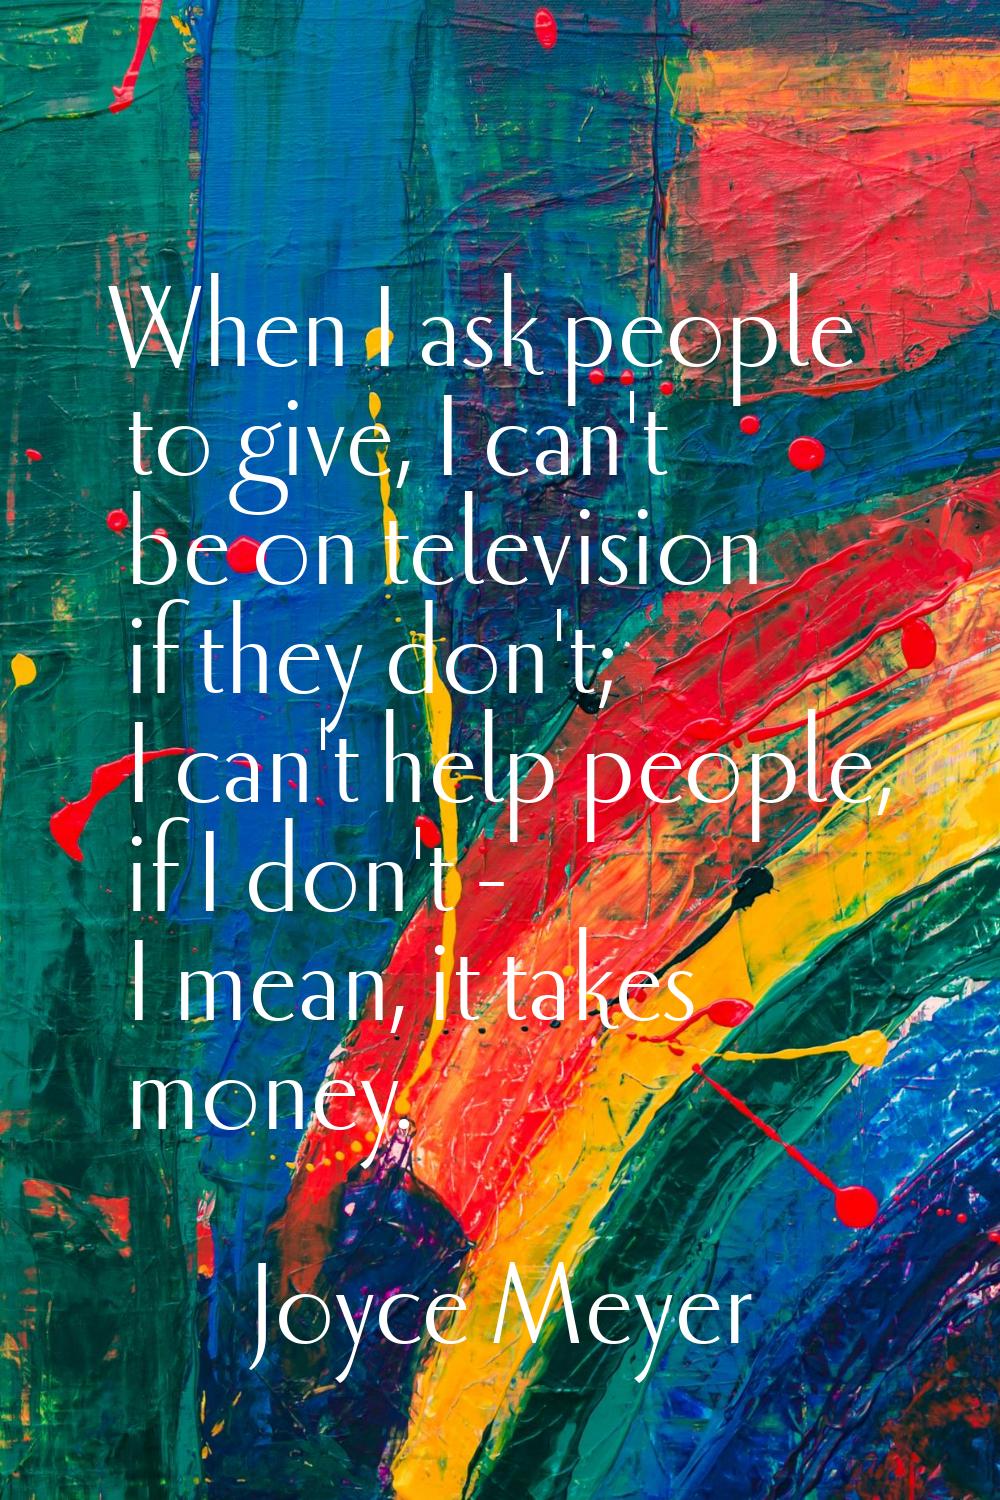 When I ask people to give, I can't be on television if they don't; I can't help people, if I don't 